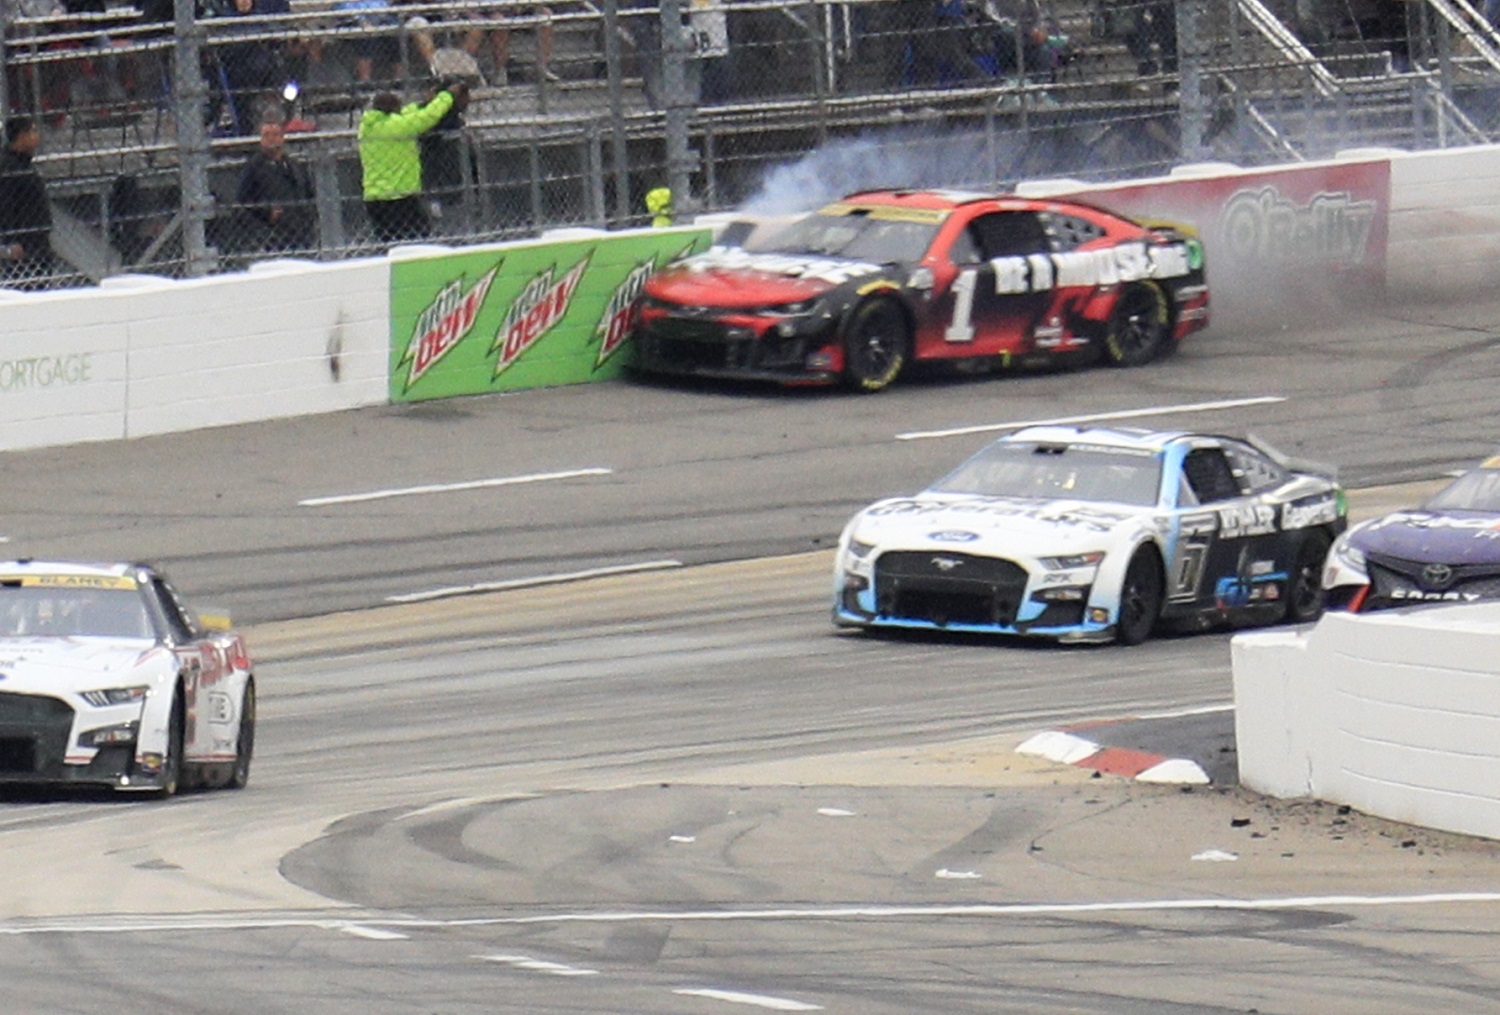 Ross Chastain runs along the wall through Turn 4 on the final lap of the NASCAR Cup Series playoff race at Martinsville on Oct. 30, 2022.